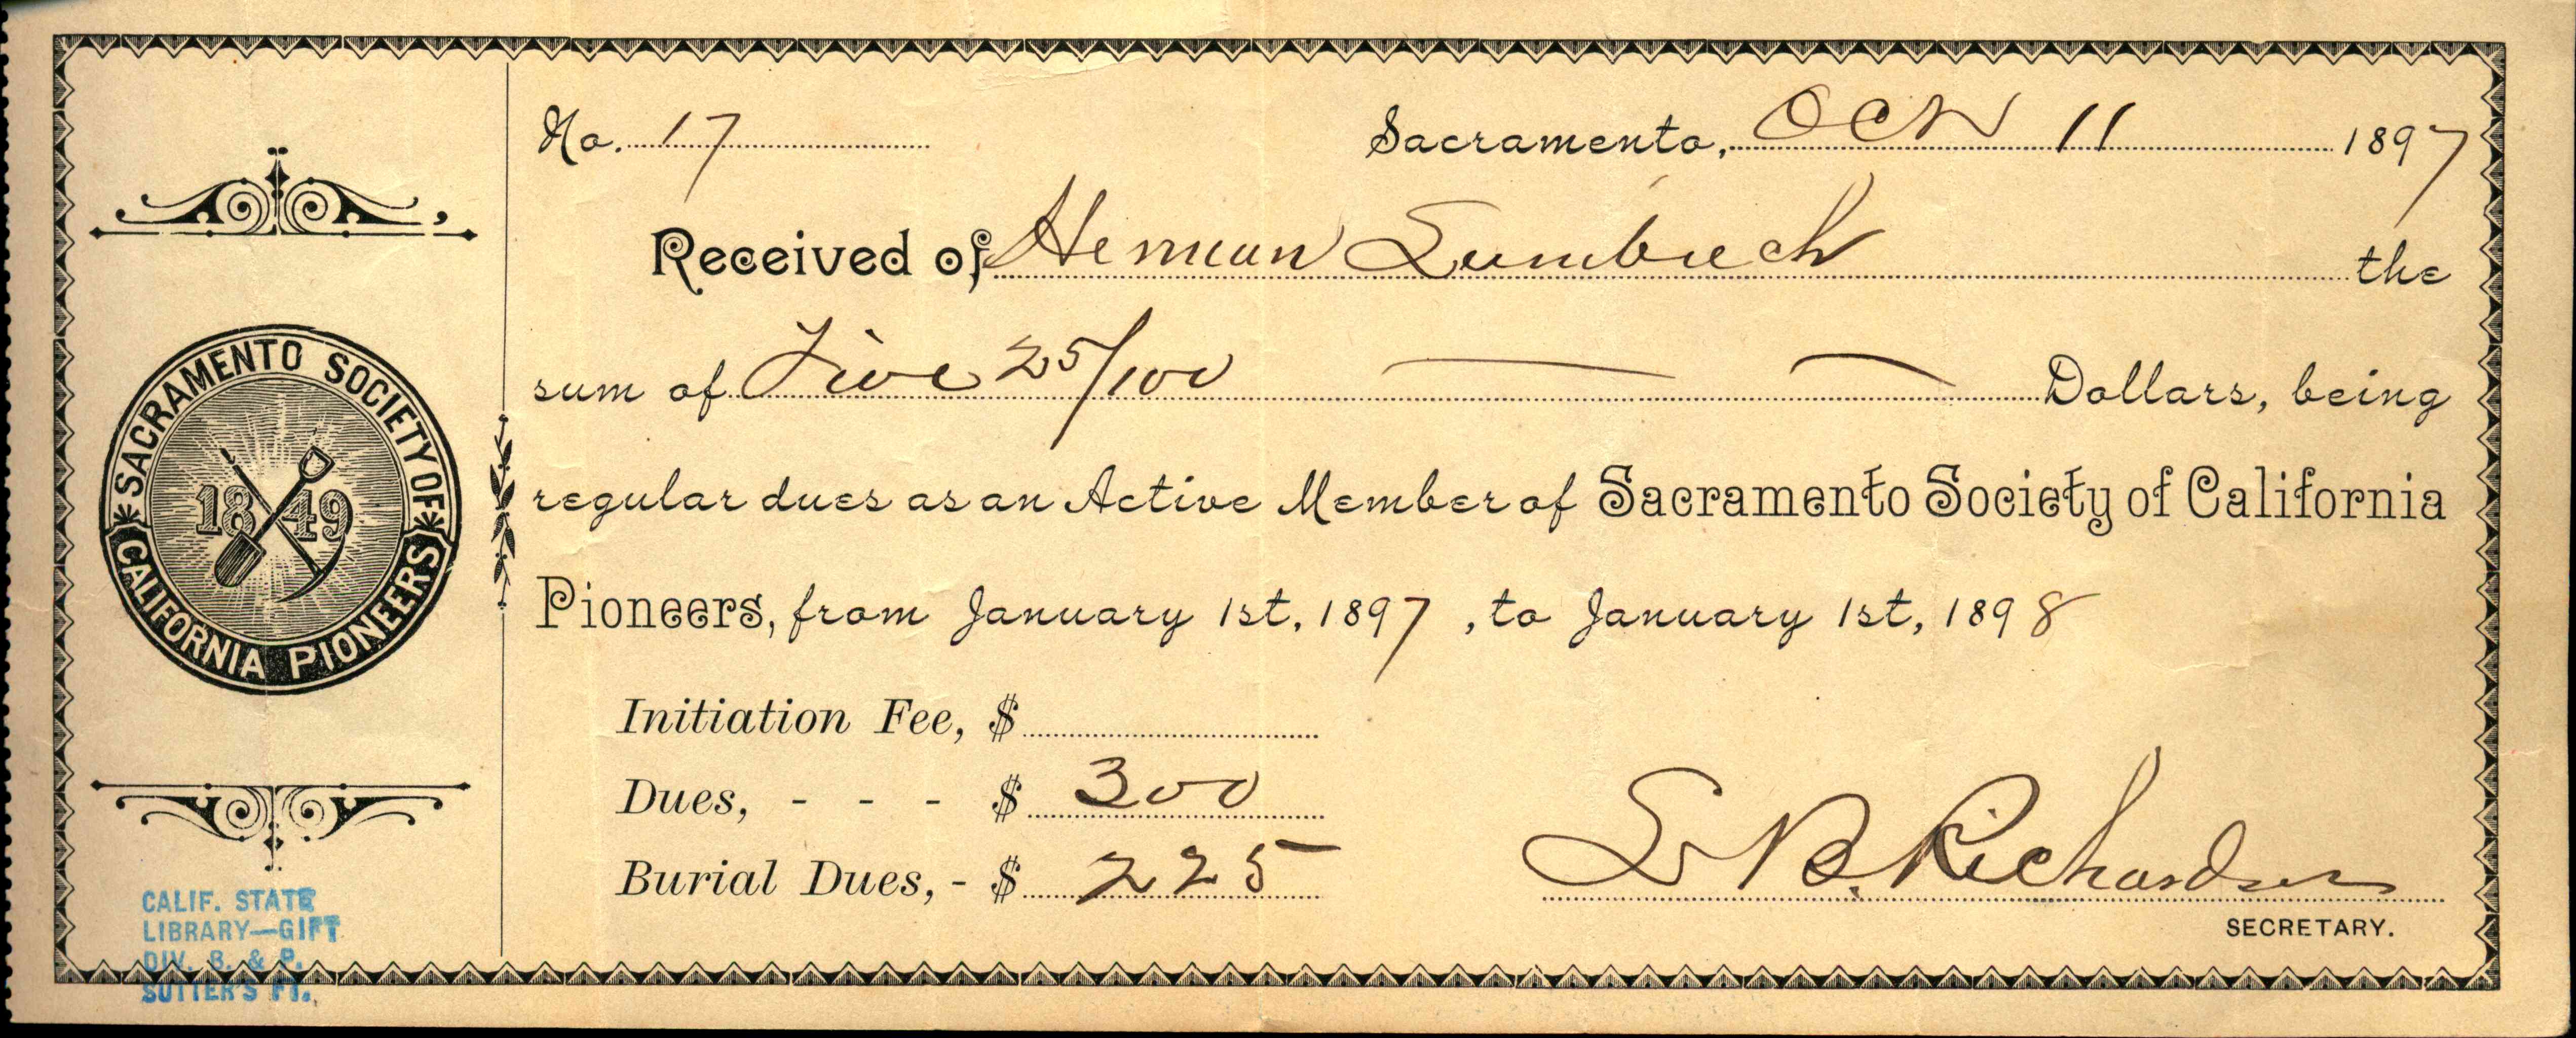 Receipt for dues for the Sacramento Society of California